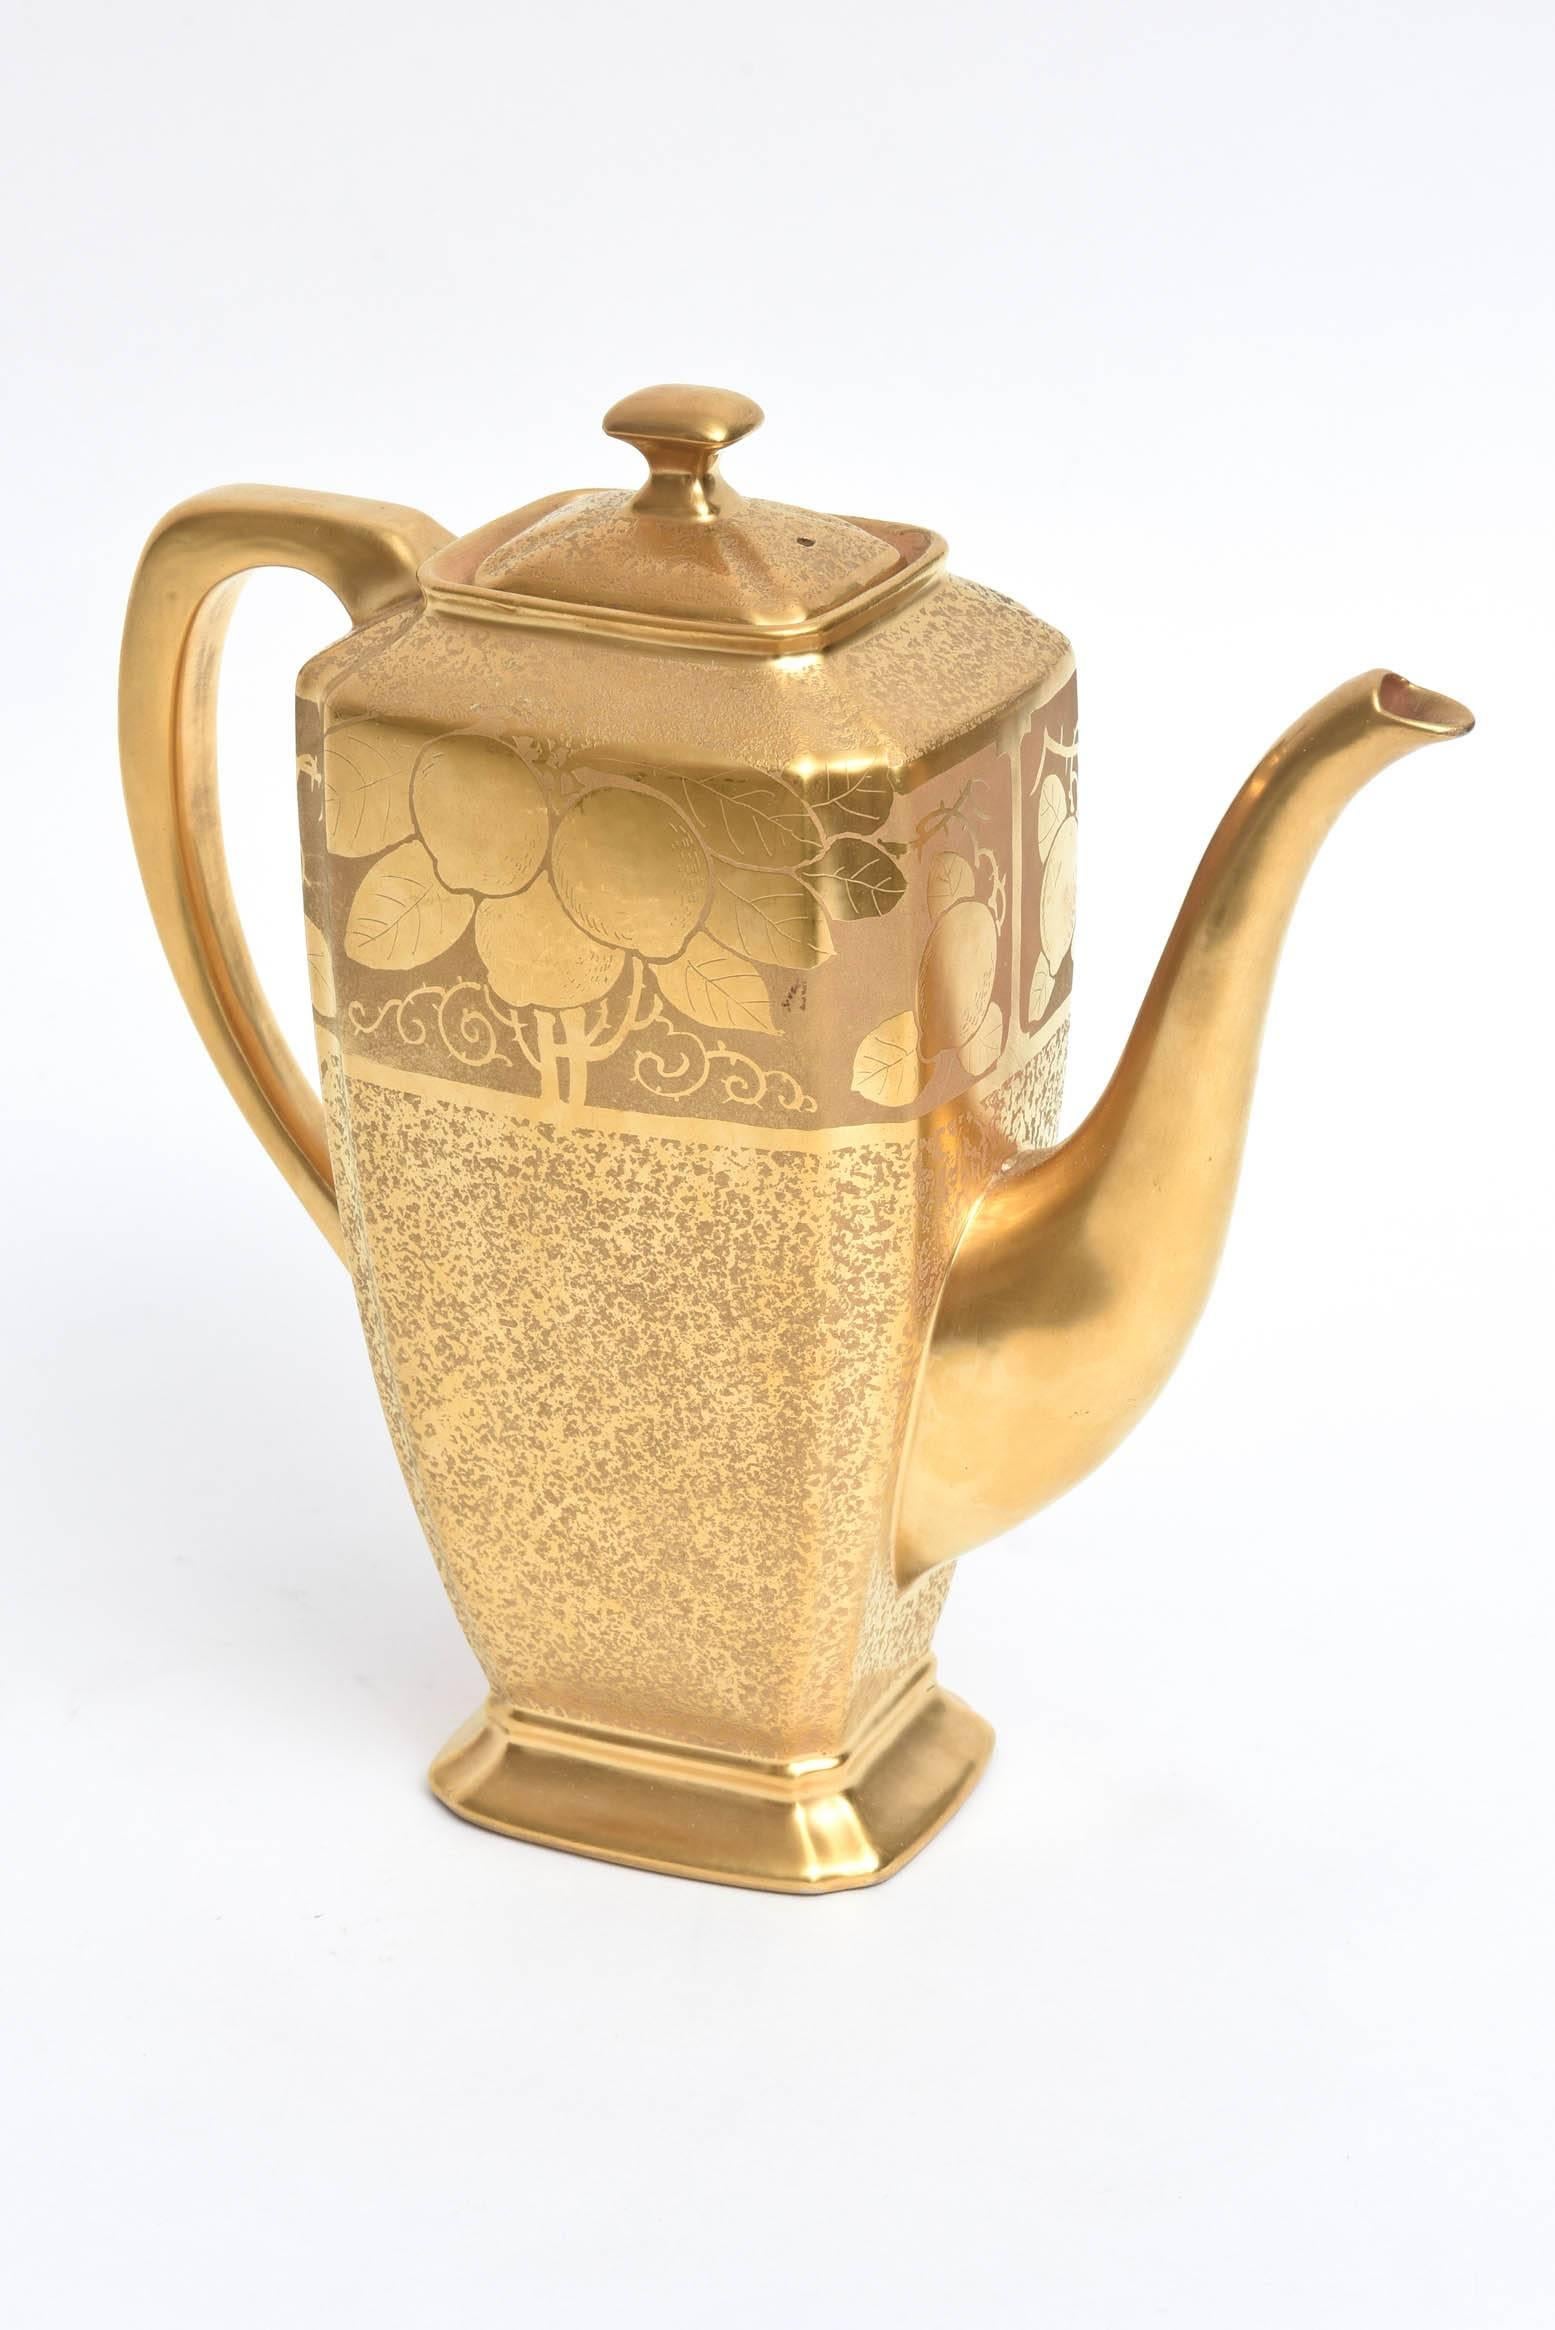 American Art Nouveau Style Gilt Encrusted Coffee Pot, Peacock and Floral